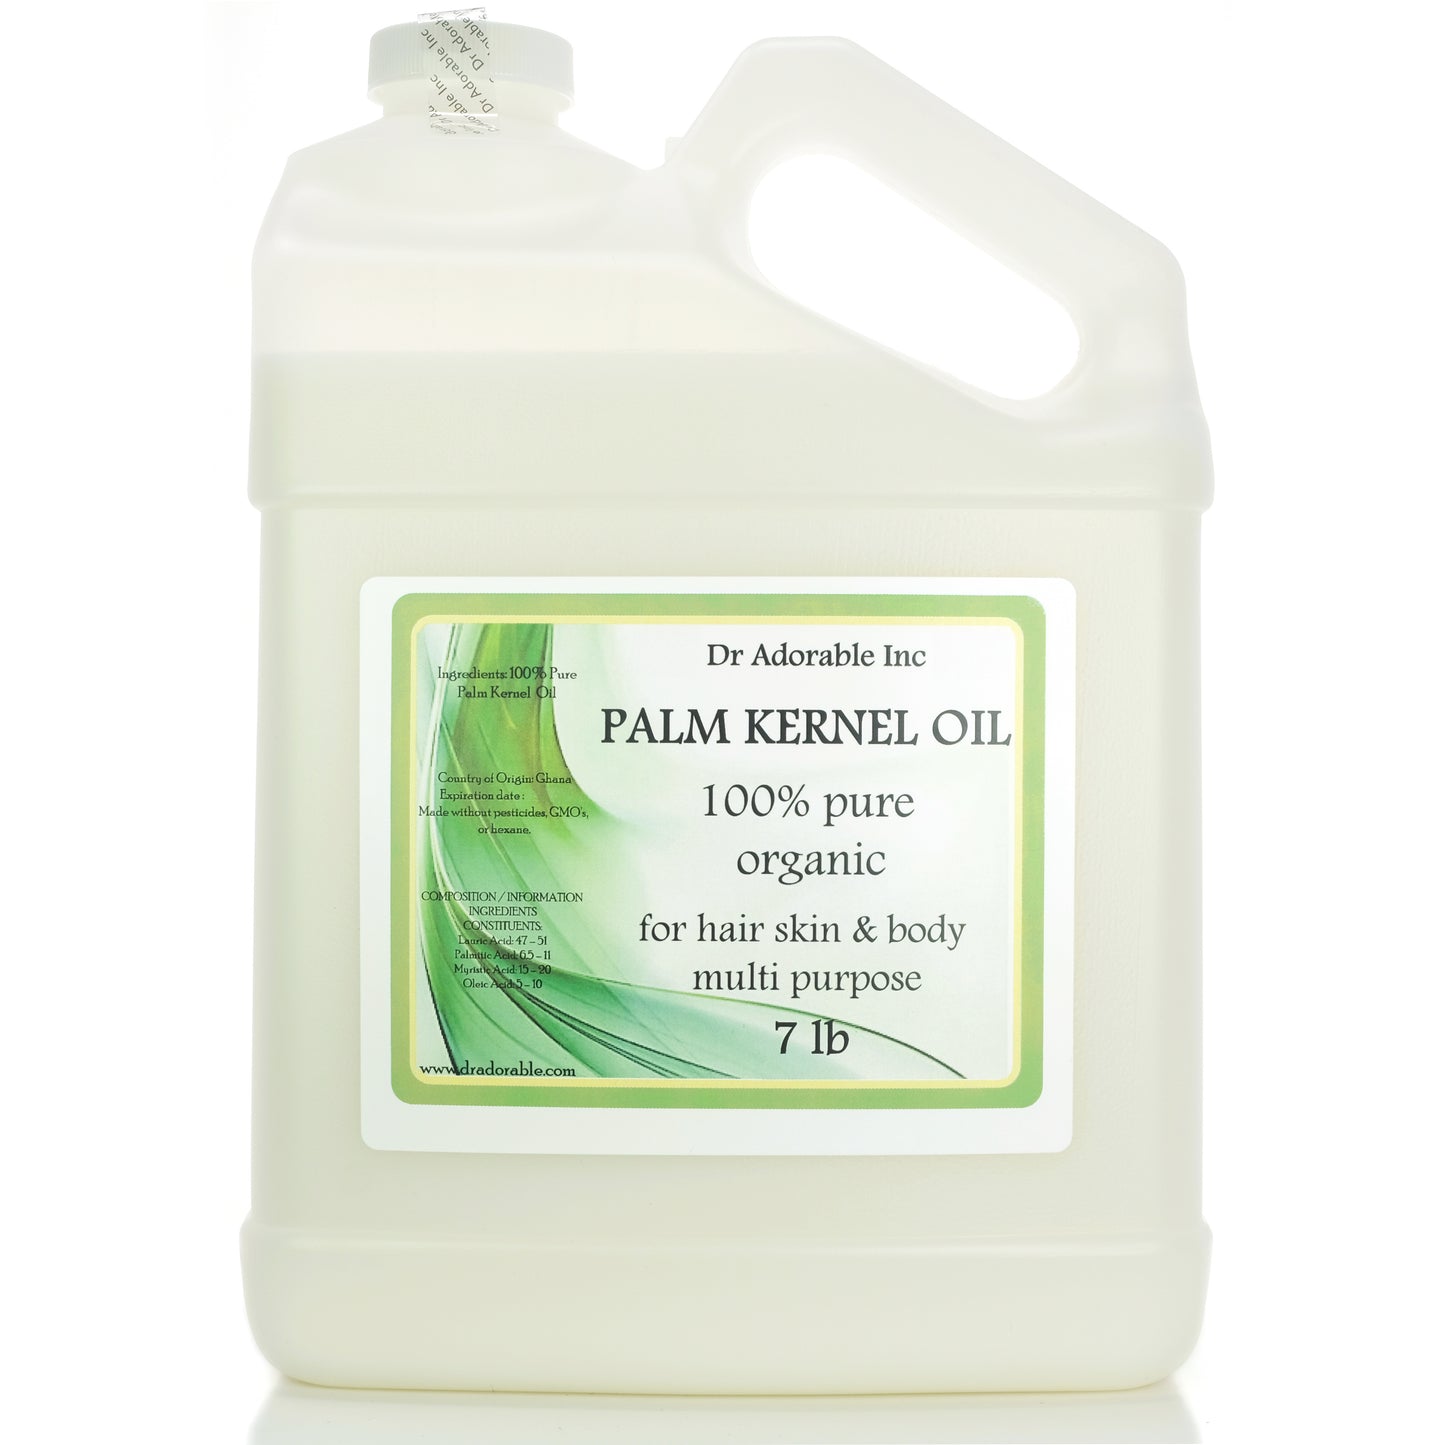 Palm Kernel Oil - 100% Pure Natural Organic Cold Pressed